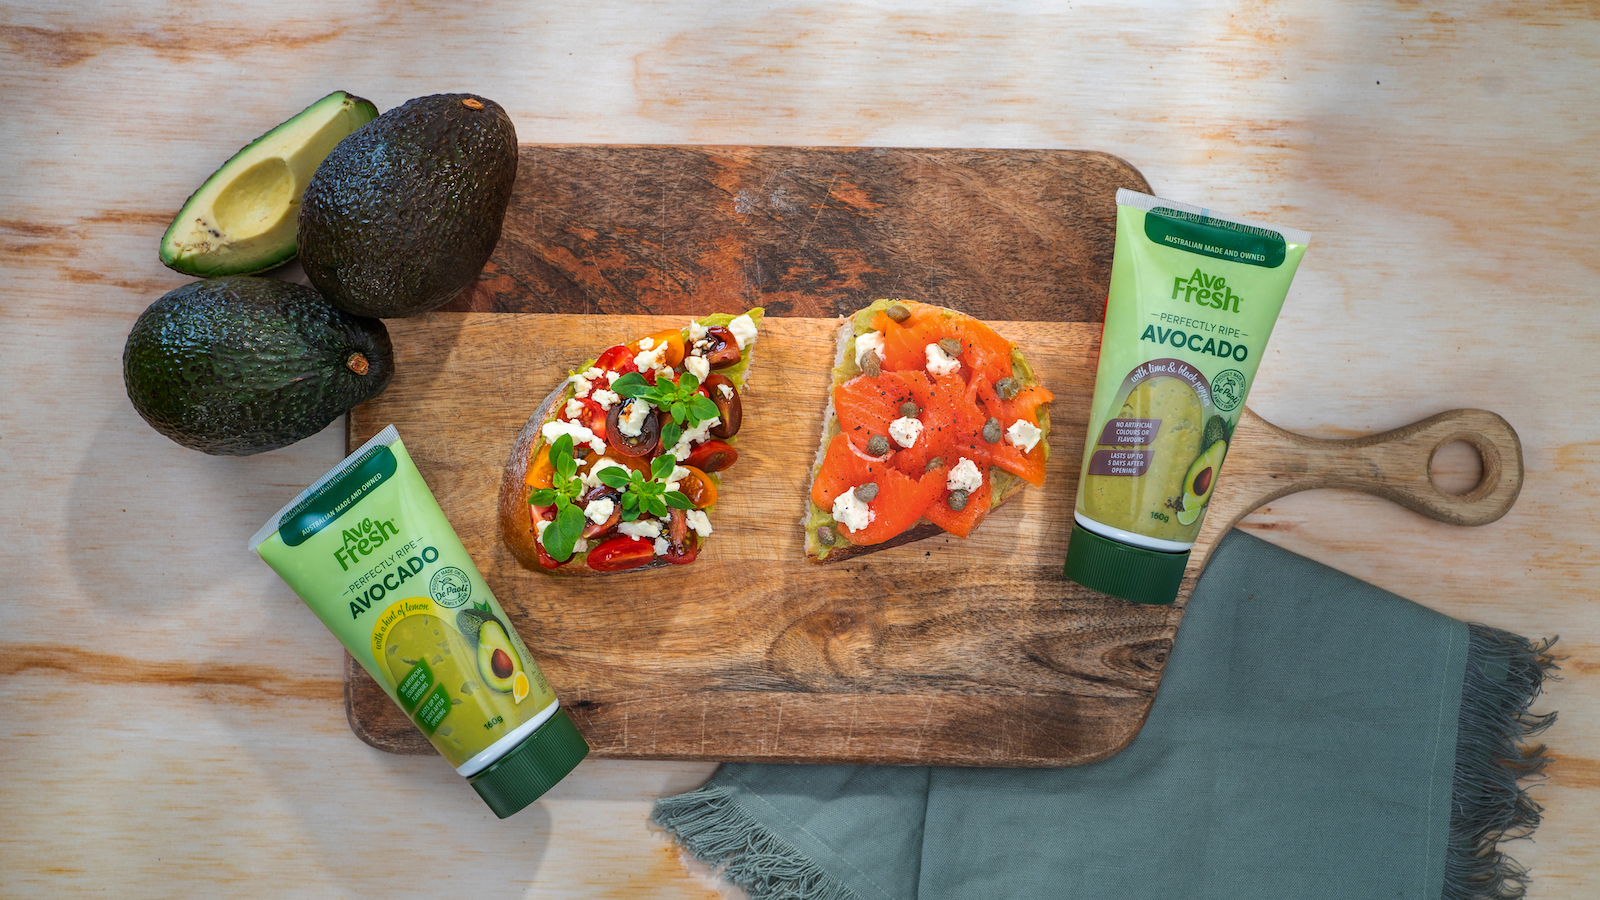 Two tubes of Avofresh avocado on a wooden board with two open topped sandwiches